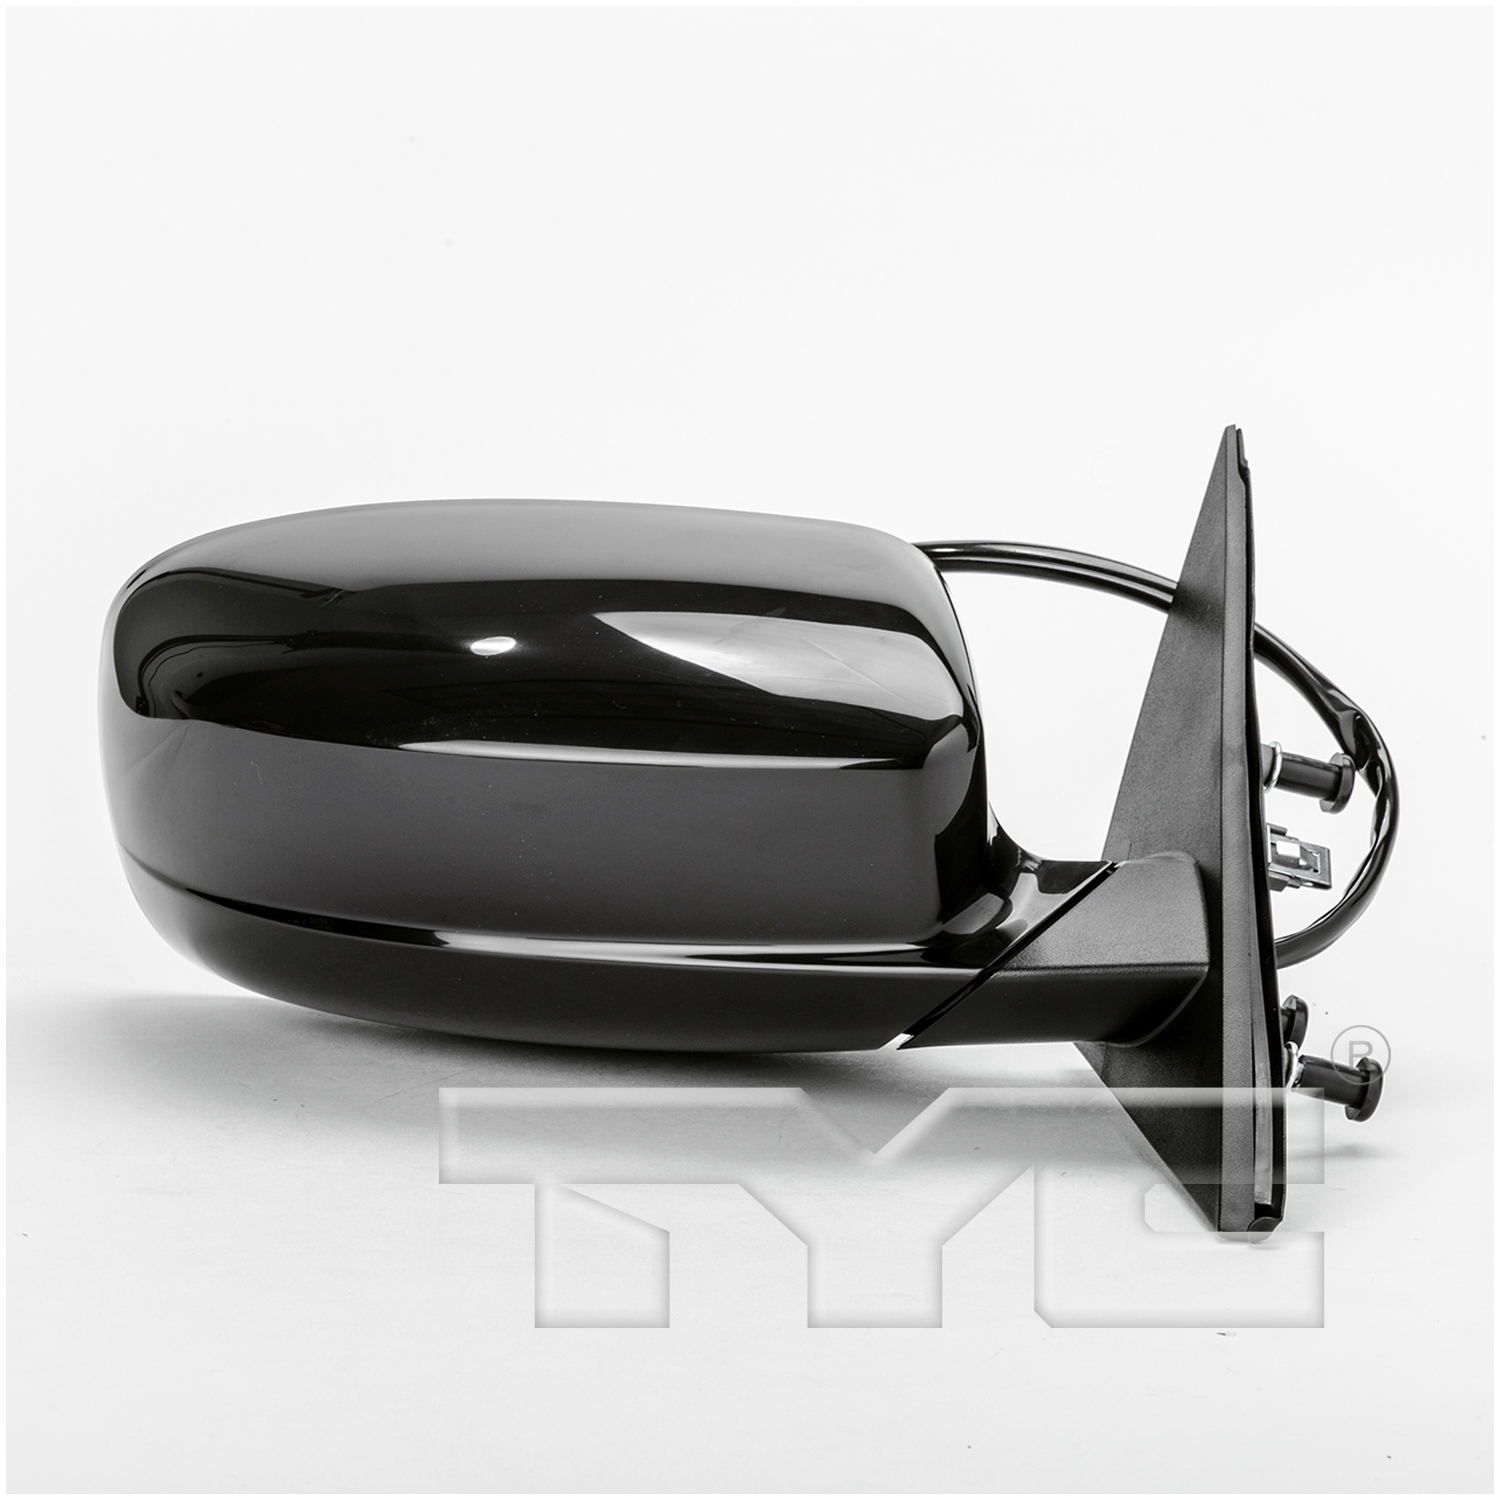 Aftermarket MIRRORS for CHRYSLER - 300, 300,11-13,RT Mirror outside rear view